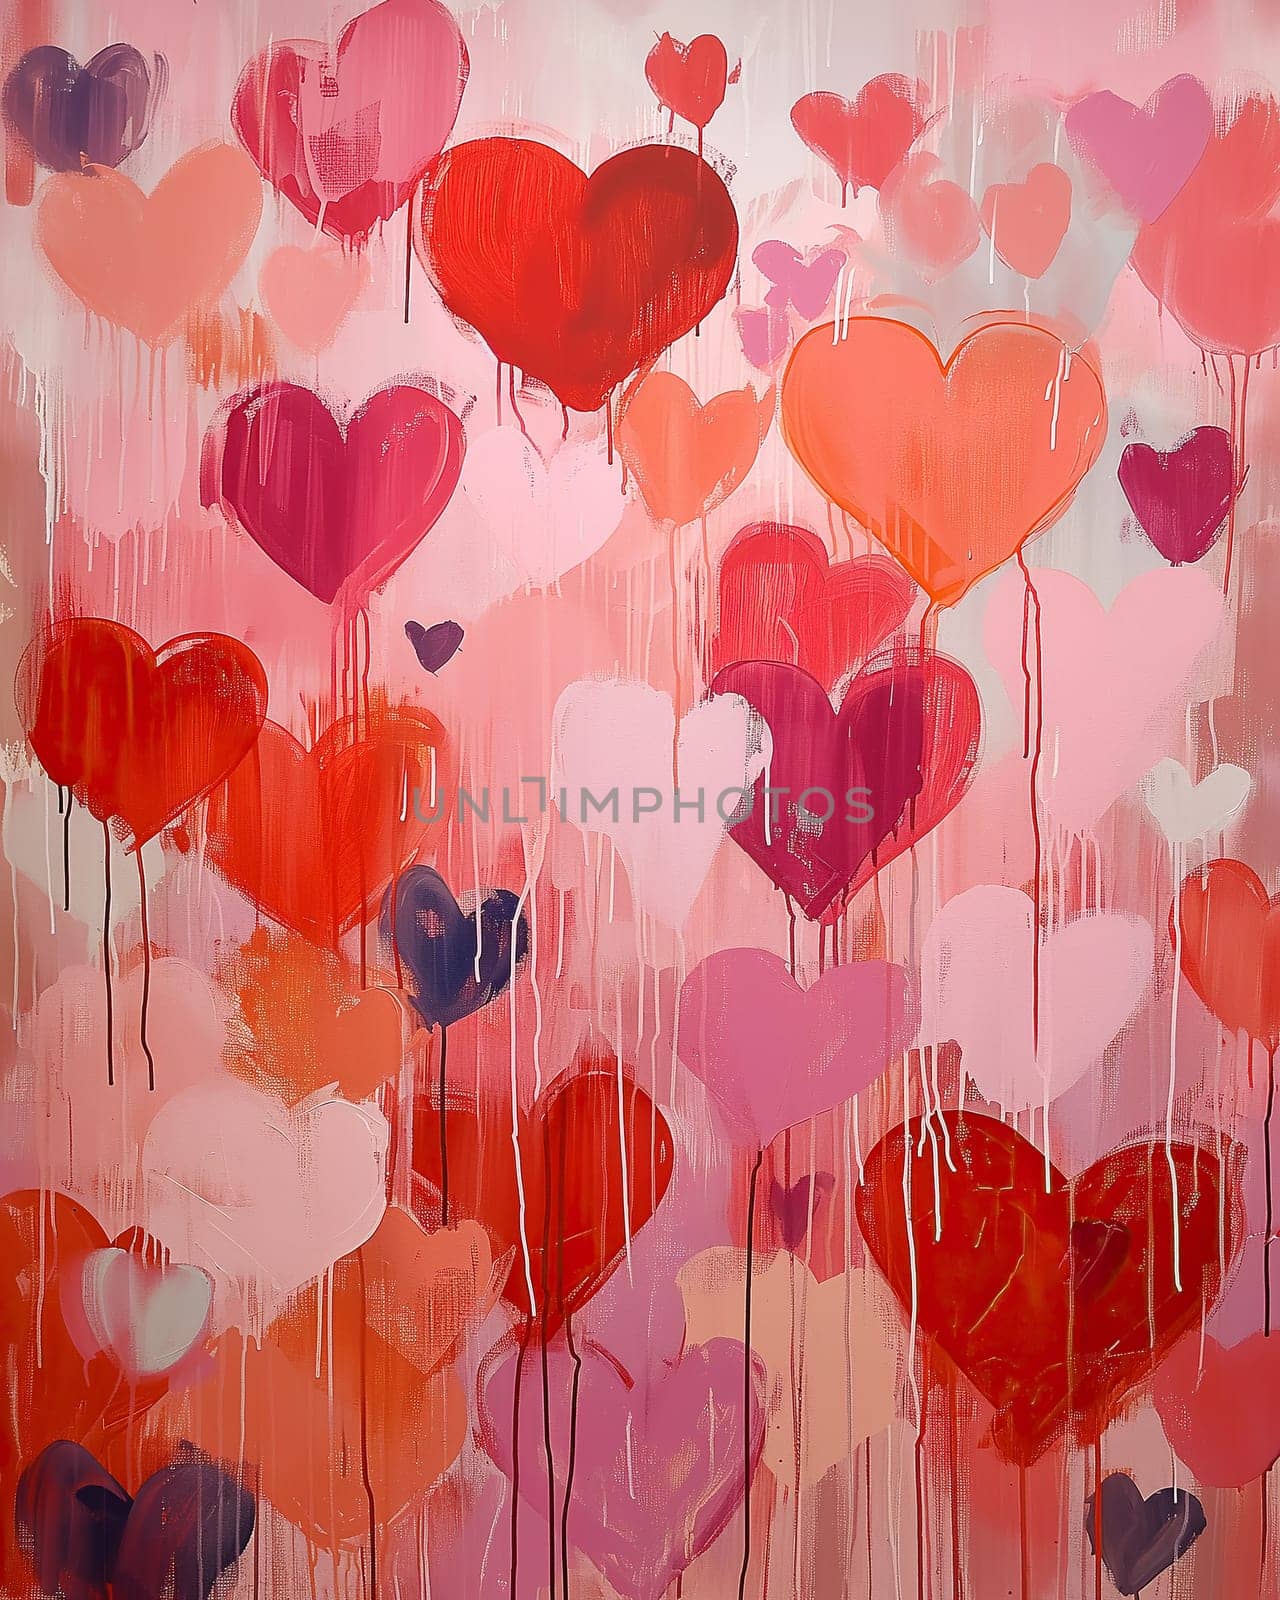 A vibrant abstract painting featuring various shades of red and pink hearts against a soft textured background. Perfect for themes of love, romance, and Valentine Day